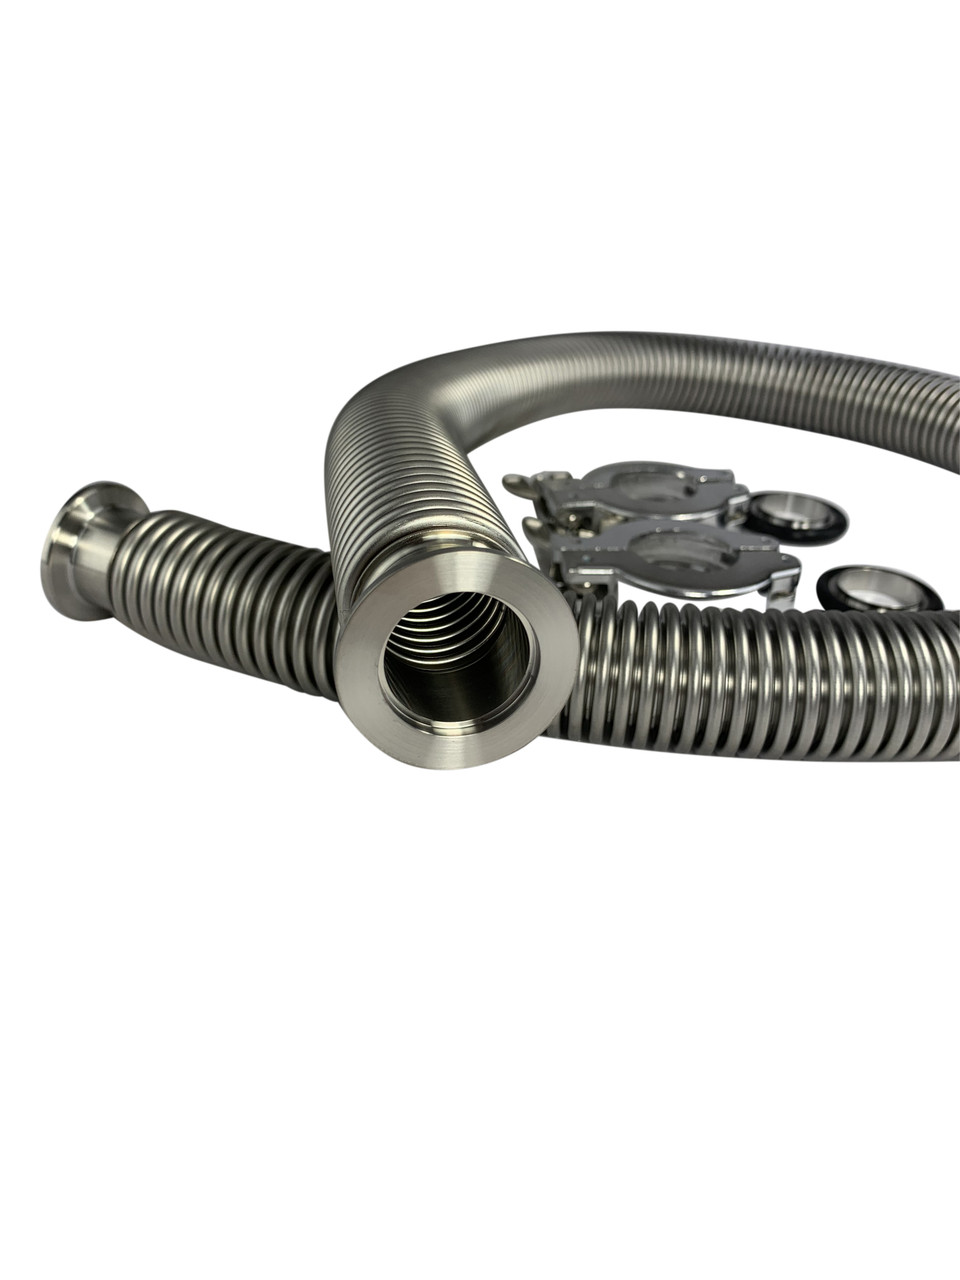 40" Thin-walled Stainless Bellow Vacuum Hose with NW25 Fittings Image 3